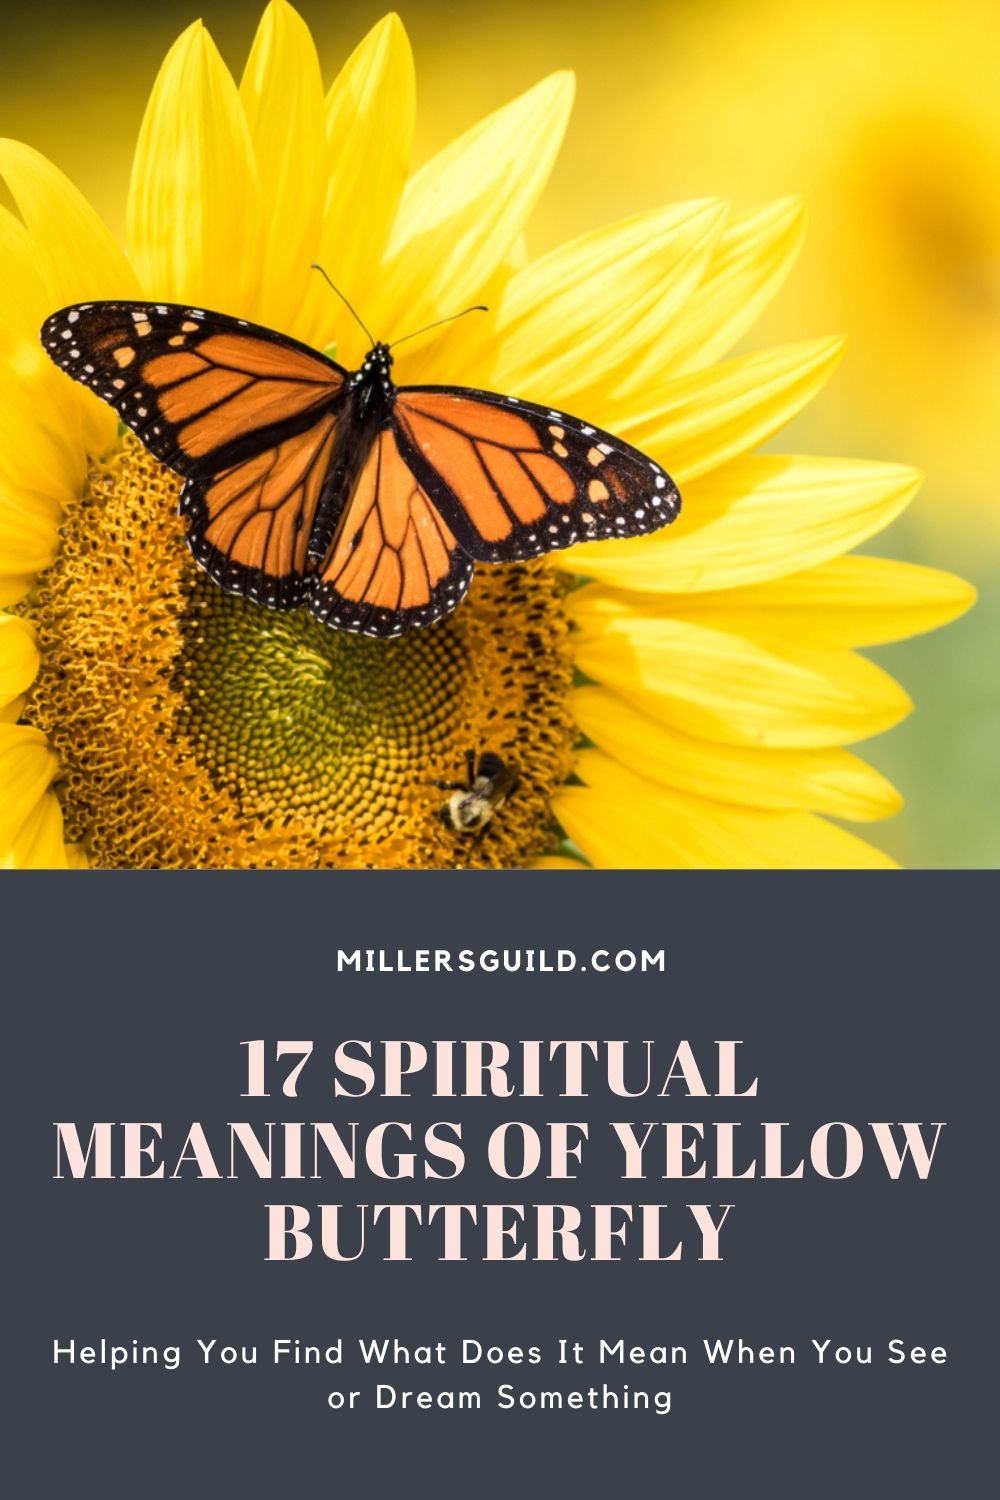 17 Spiritual Meanings of Yellow Butterfly 2